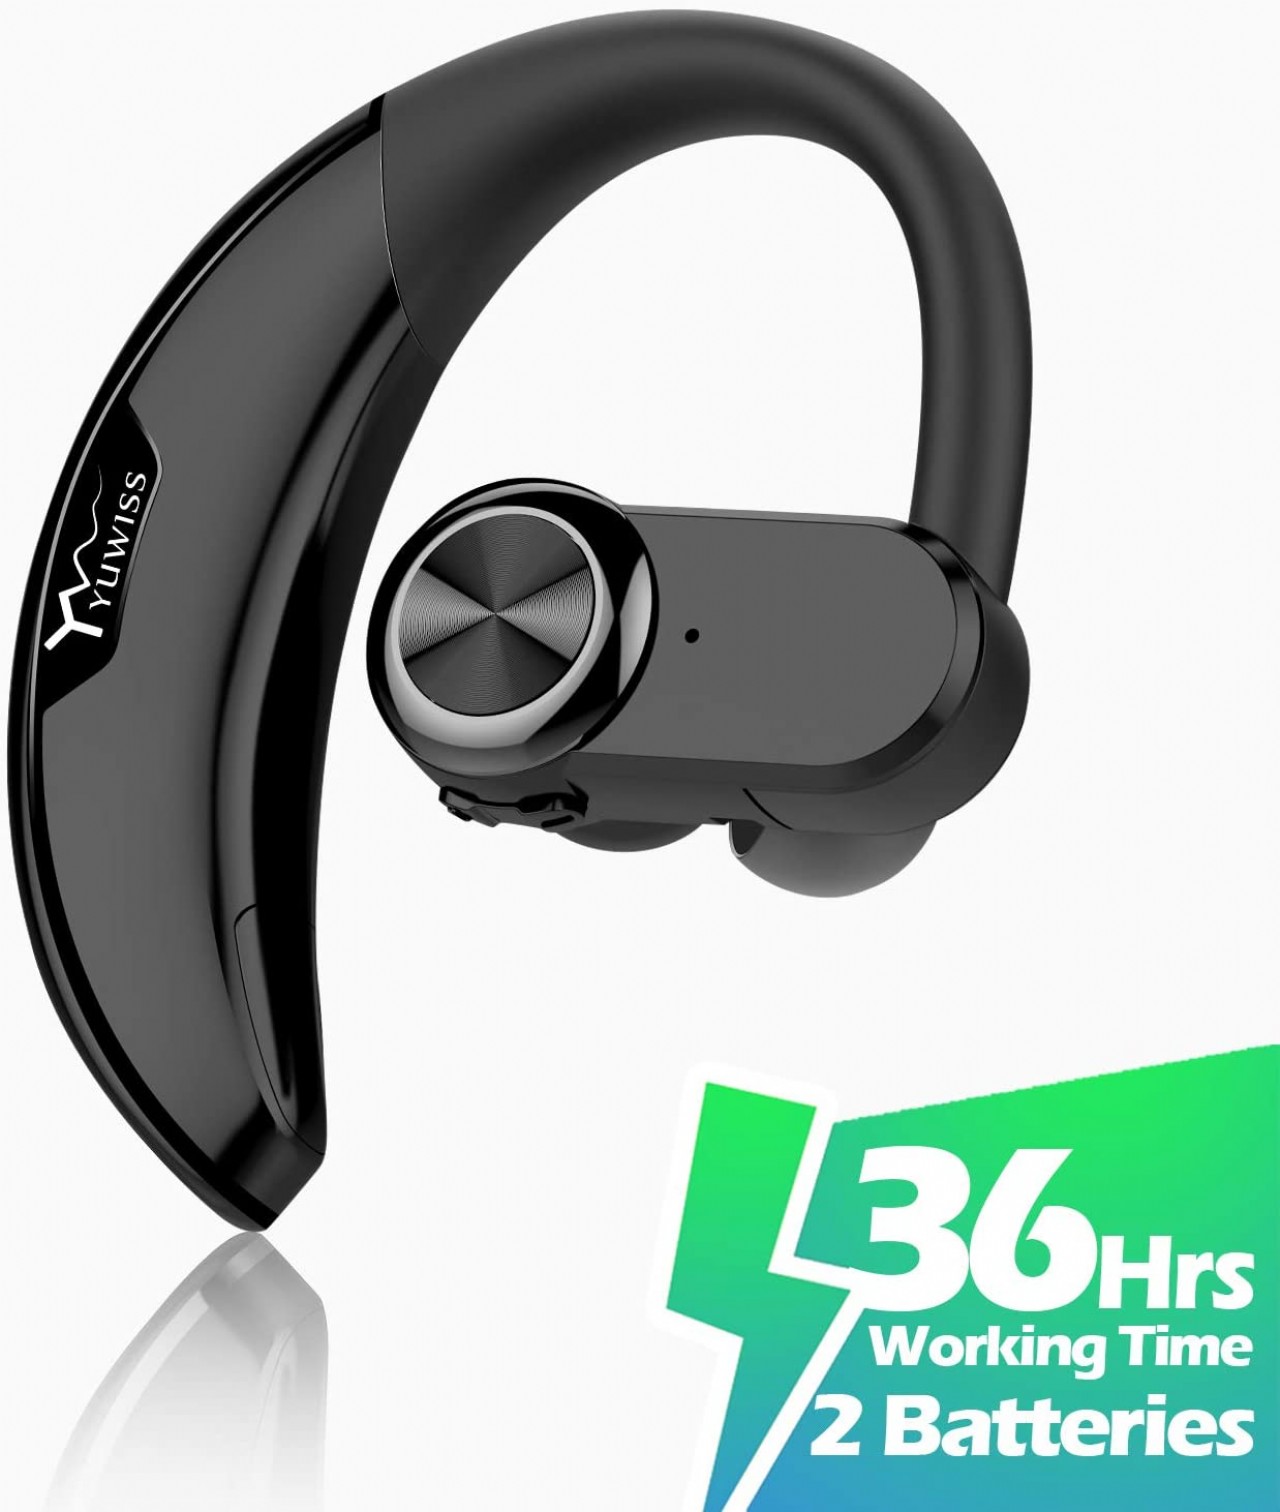 Bluetooth Headset [36Hrs Playtime, 2 Batteries, V4.2] Wireless Bluetooth Earpiece for Cell Phone